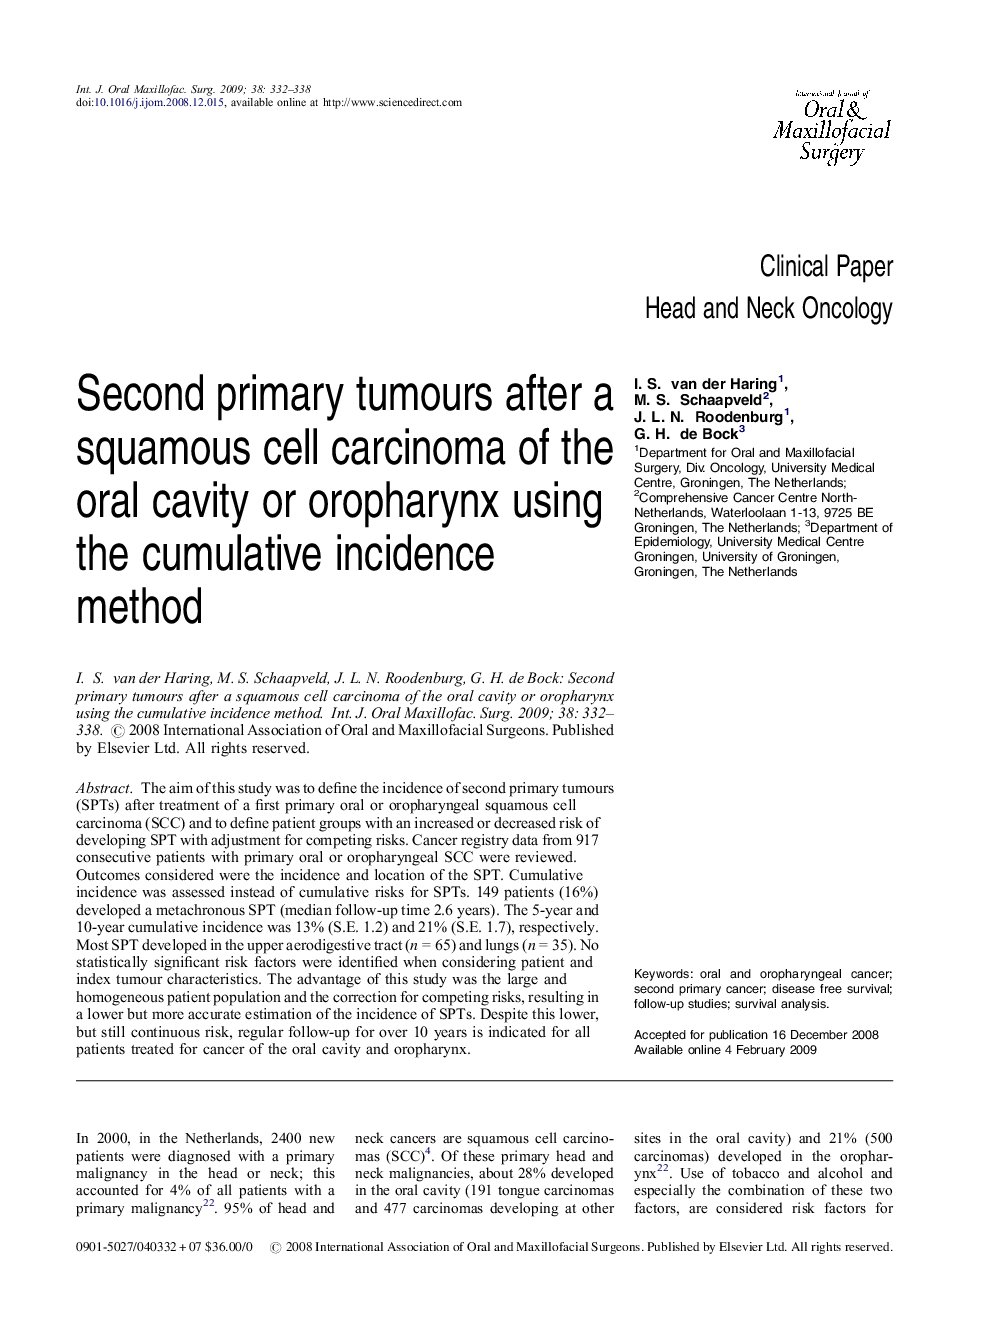 Second primary tumours after a squamous cell carcinoma of the oral cavity or oropharynx using the cumulative incidence method